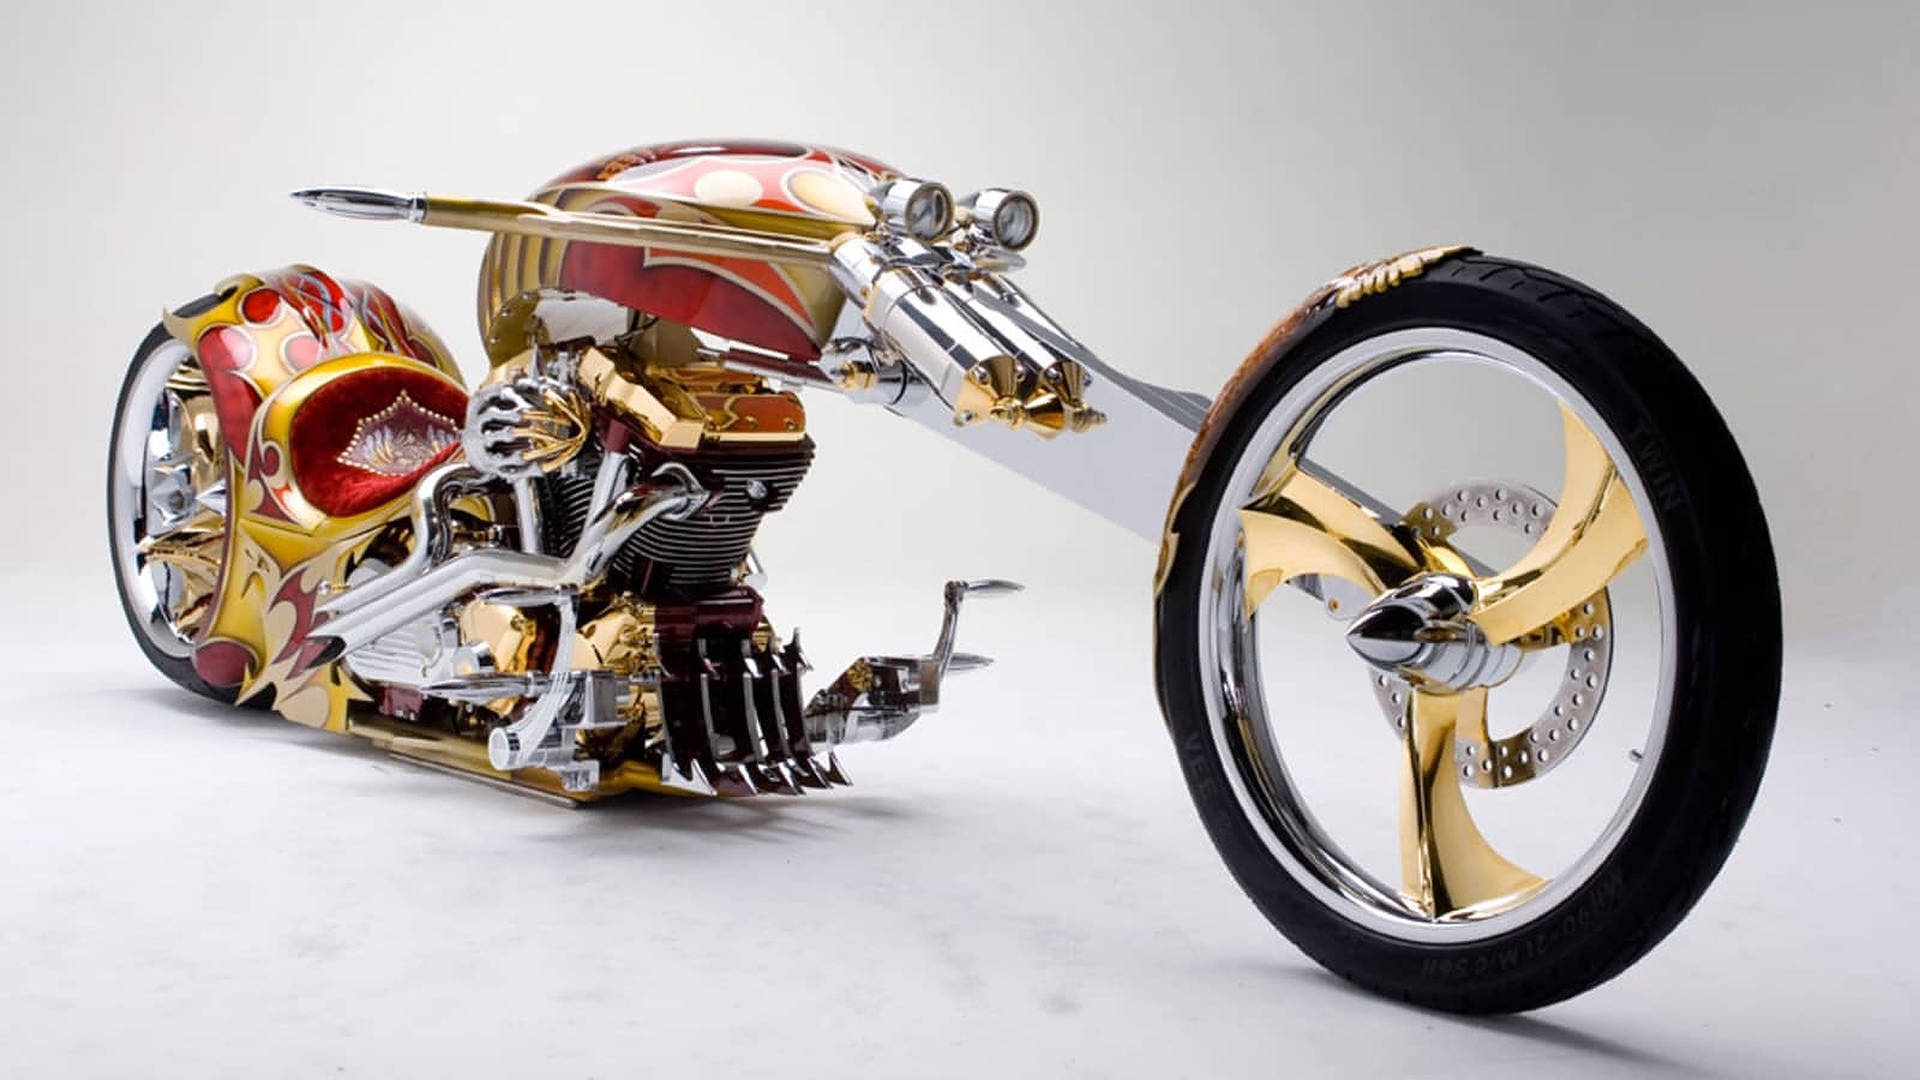 Gold Plated Chopper Motorcycle Wallpaper